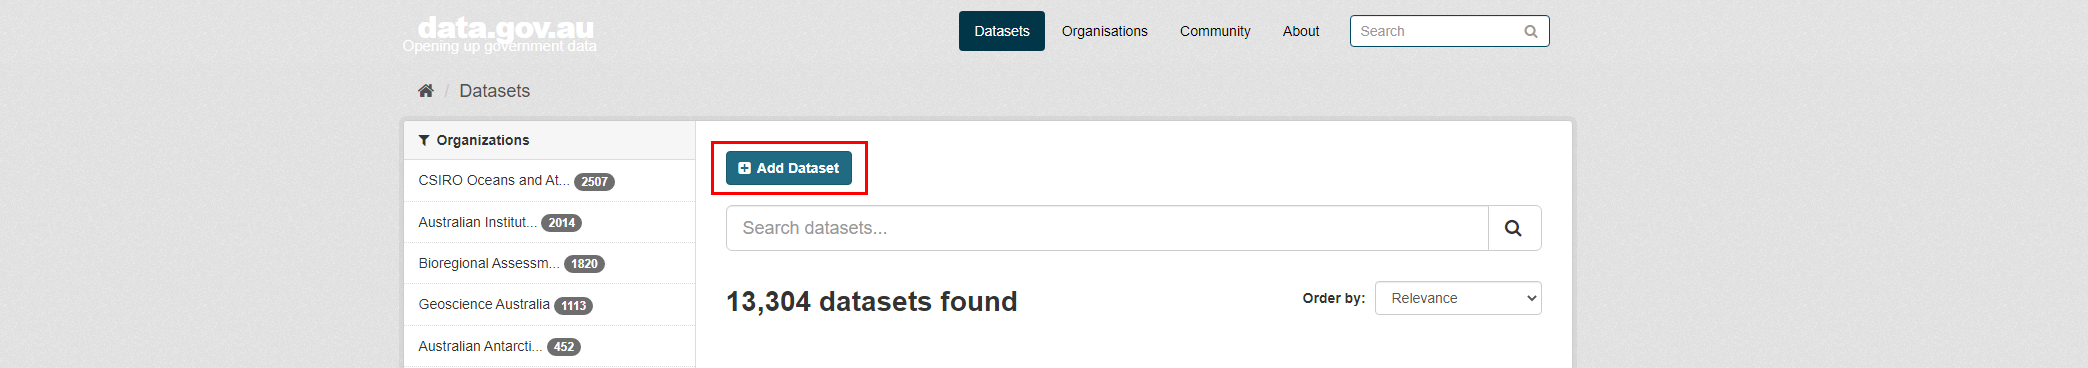 Data.gov.au datasets page is now shown with the add dataset button highlighted in the centre of the page